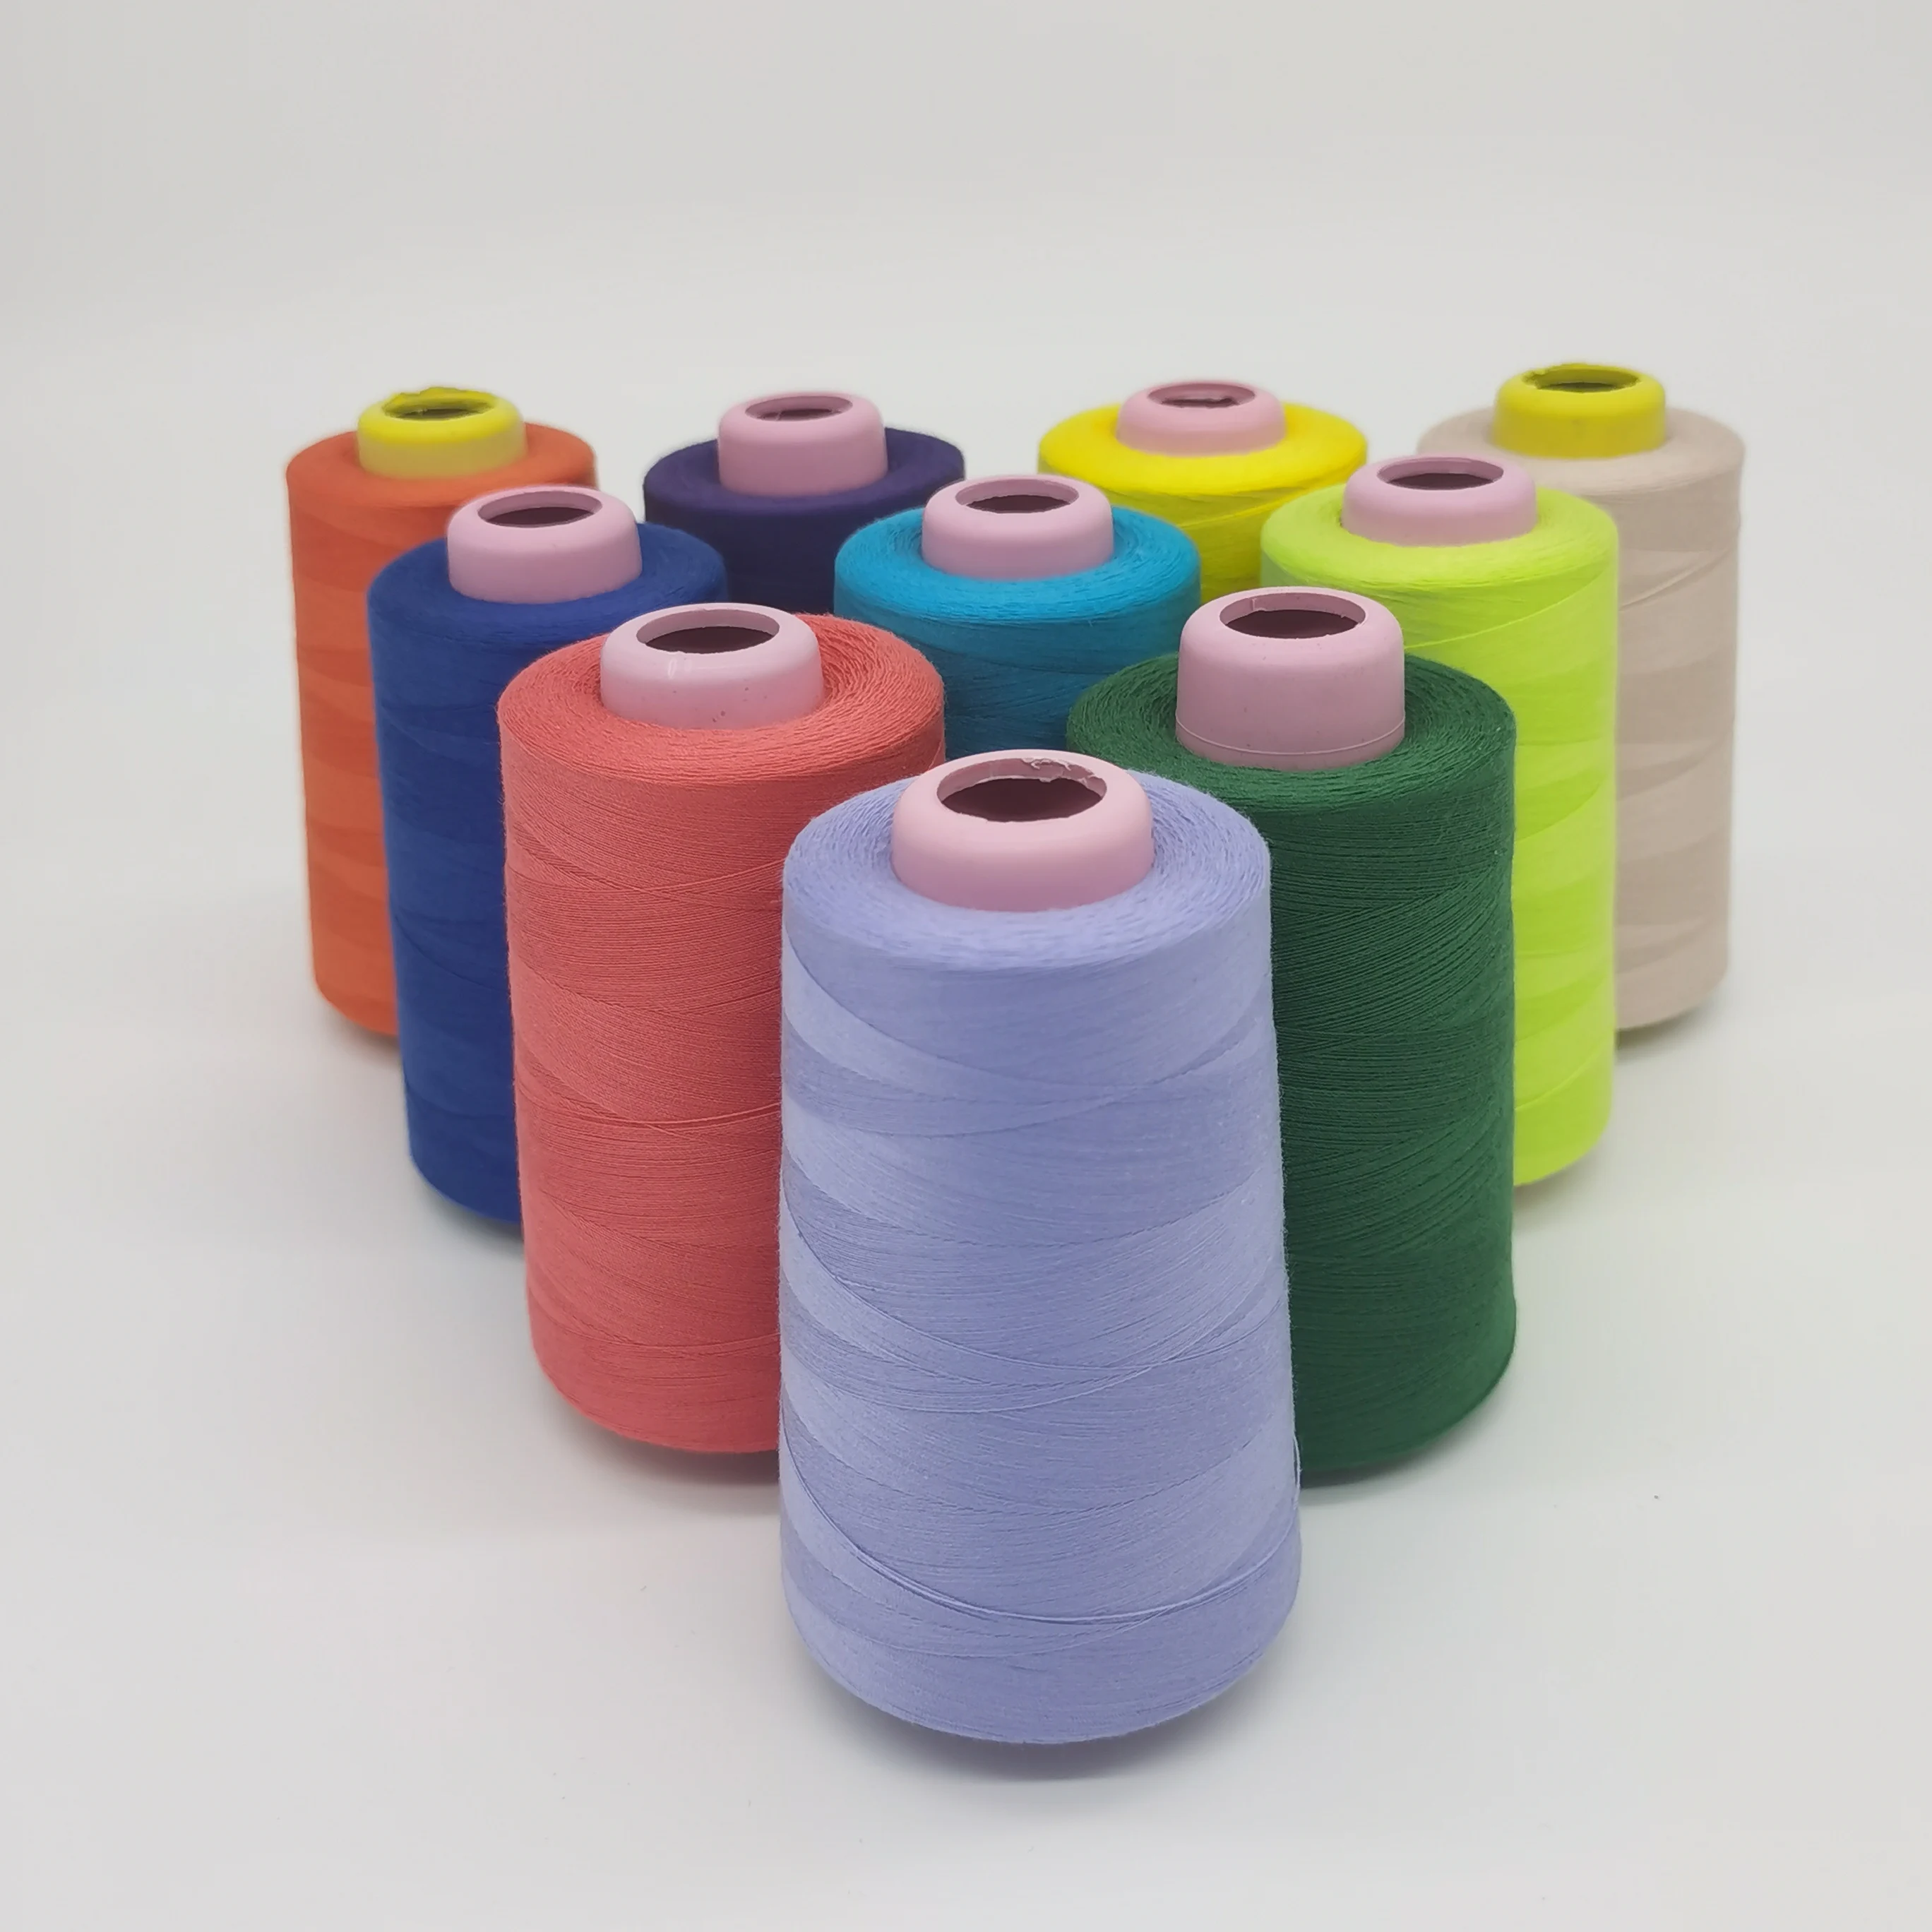 Sewing Thread 100% Polyester Factory Thread 402 Sewing Thread For ...